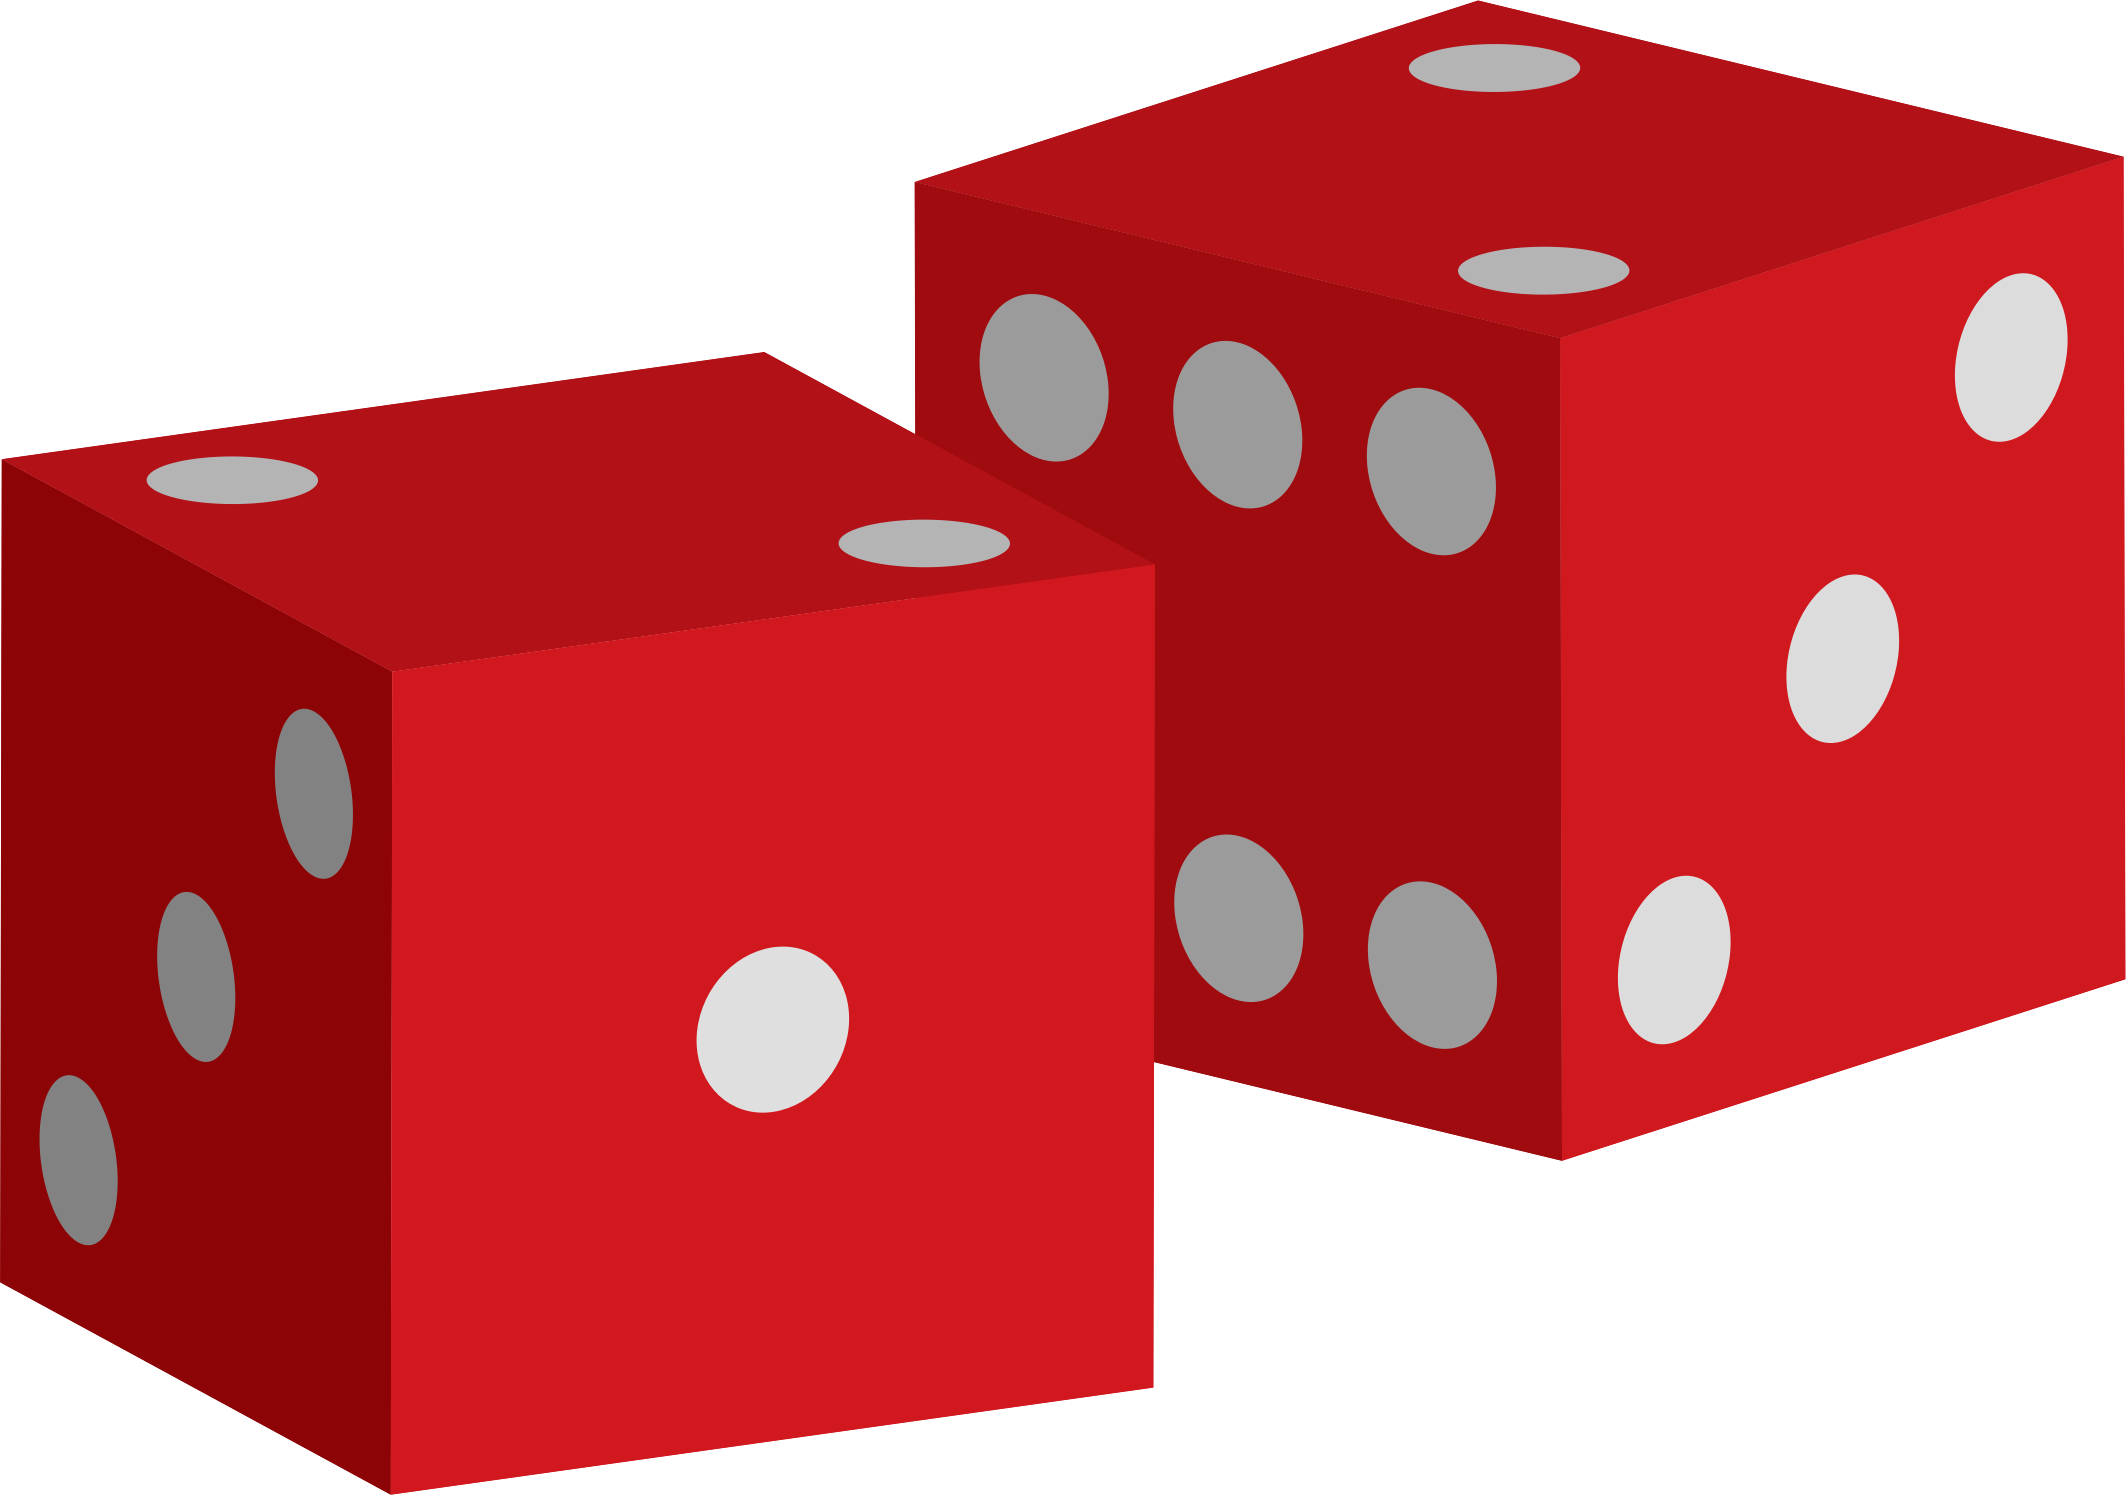 Free To Use Public Domain Dice Clip Art - Red Dice Clipart (2126x1495)